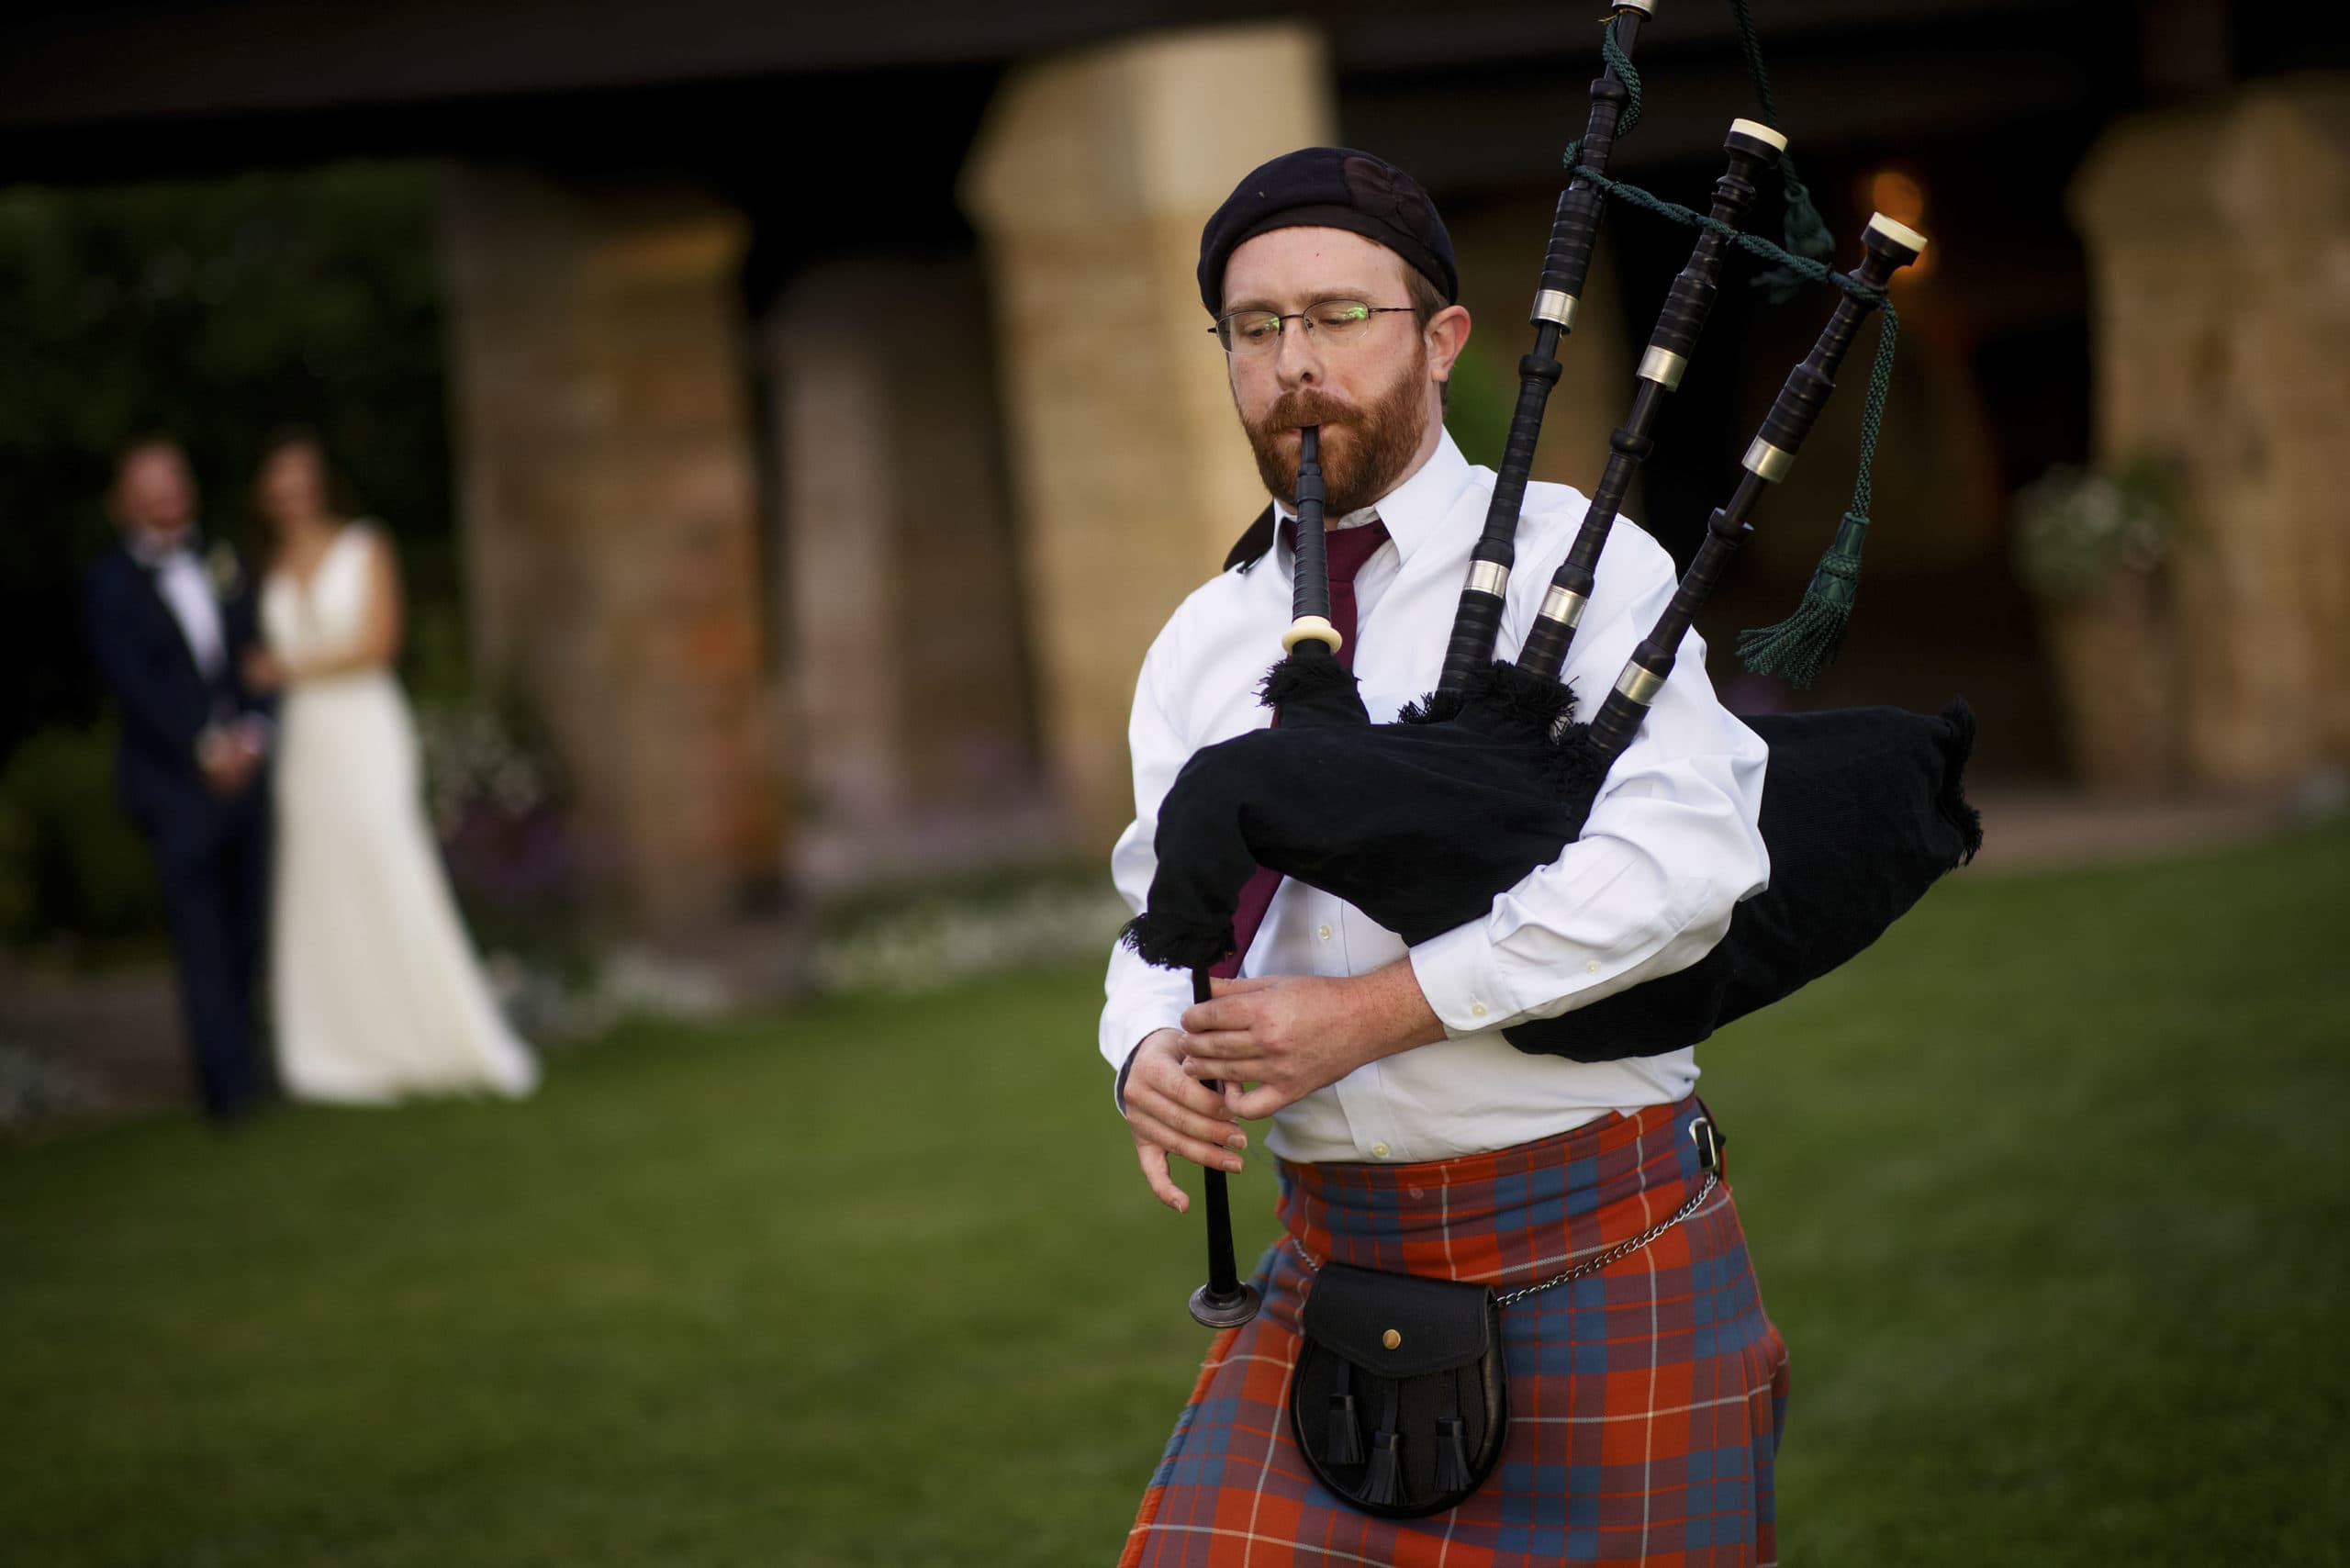 A bagpiper plays during Casey and DarrenÕs wedding reception at Sanctuary Golf Course